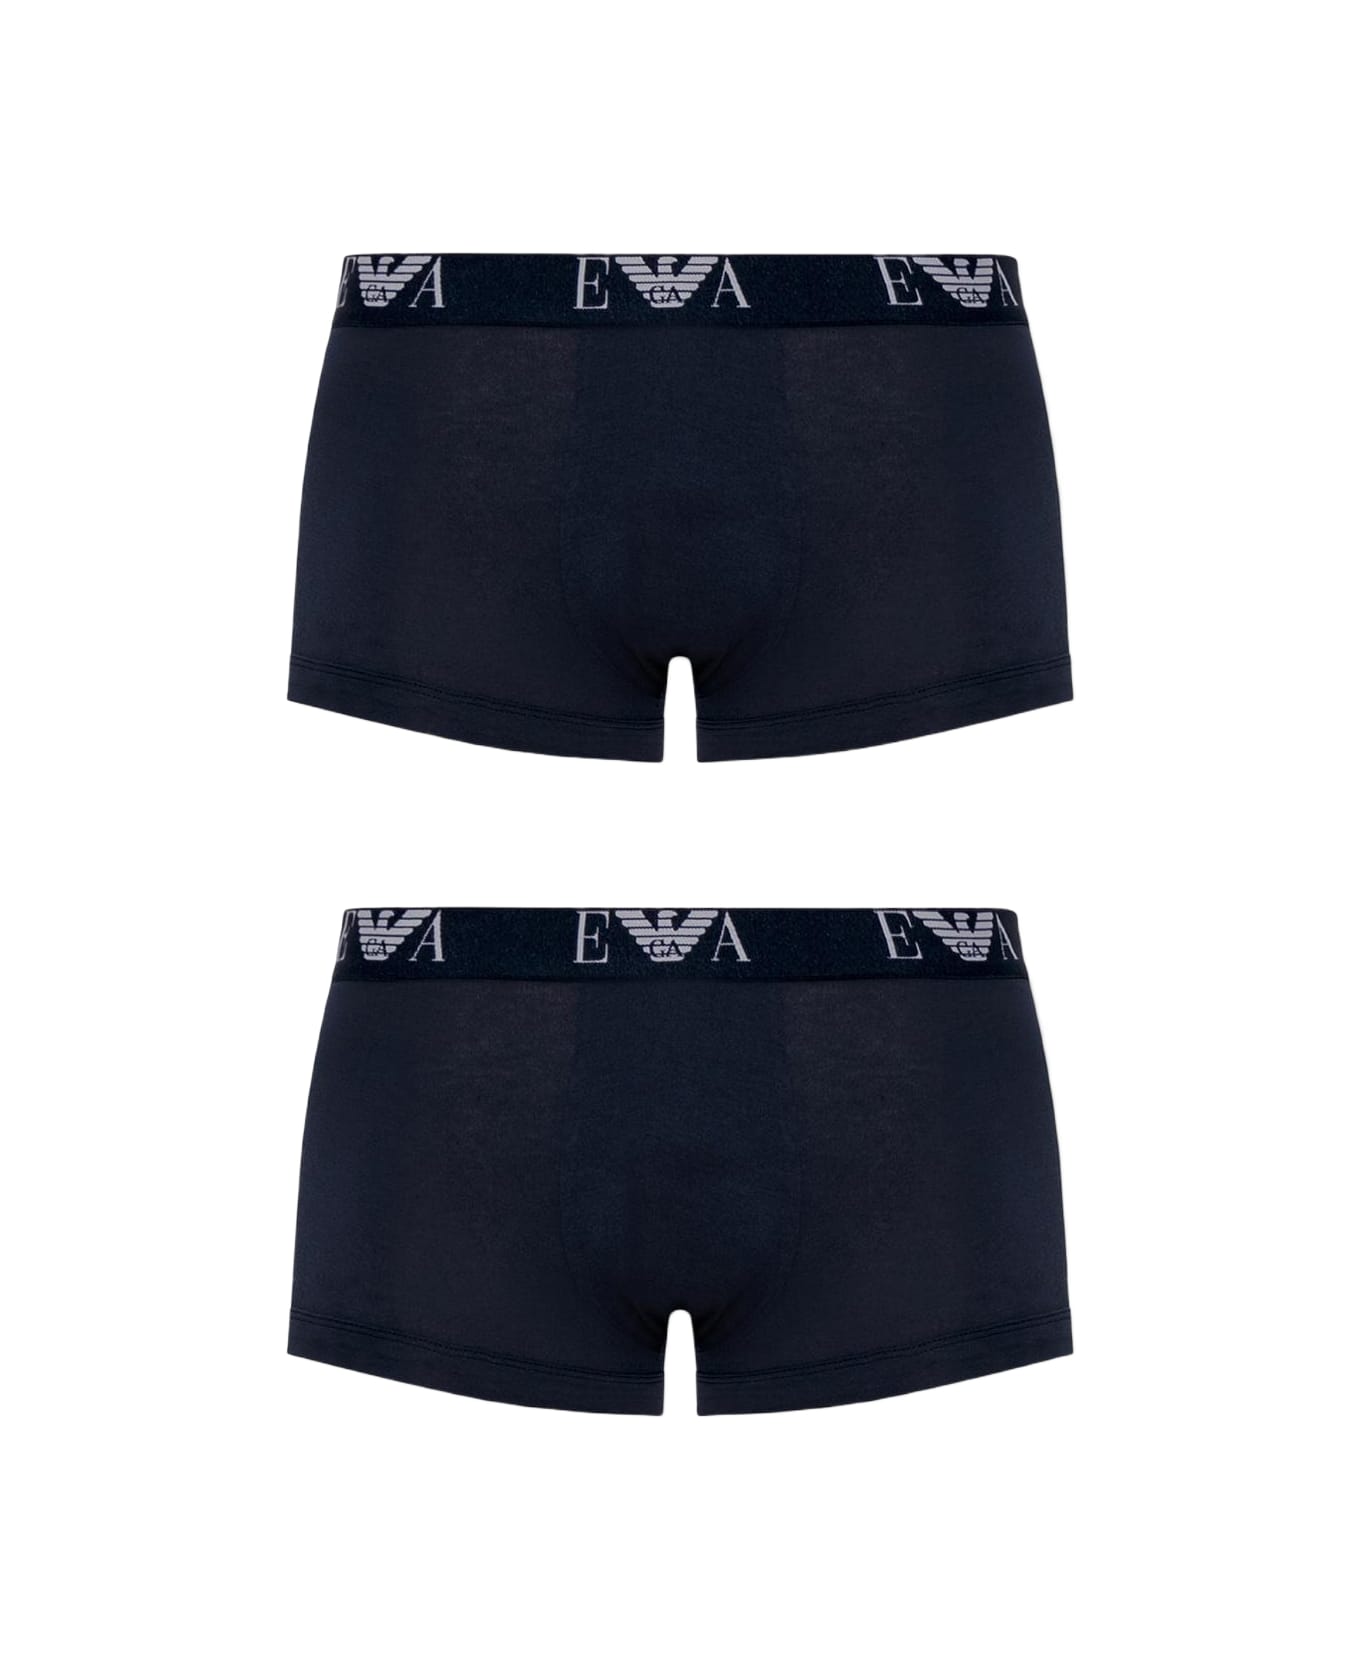 Emporio Armani Branded Boxers Two-pack - Blue